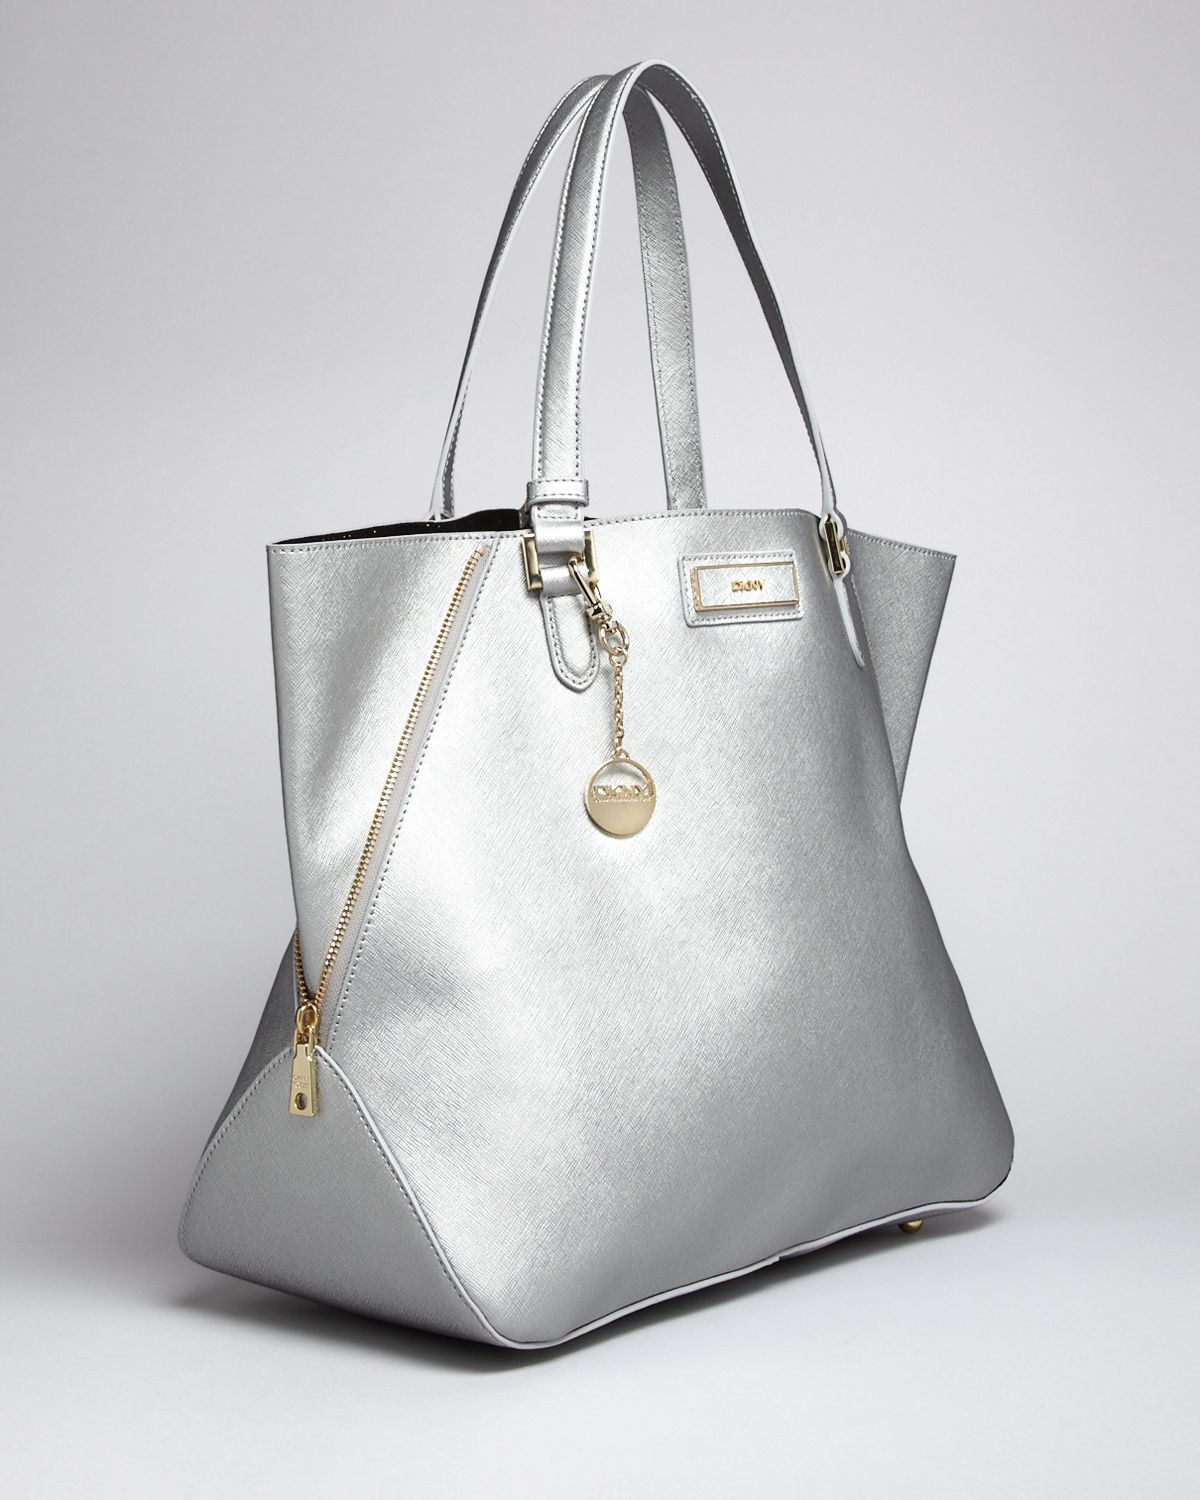 DKNY Tote bag Saffiano silver large used